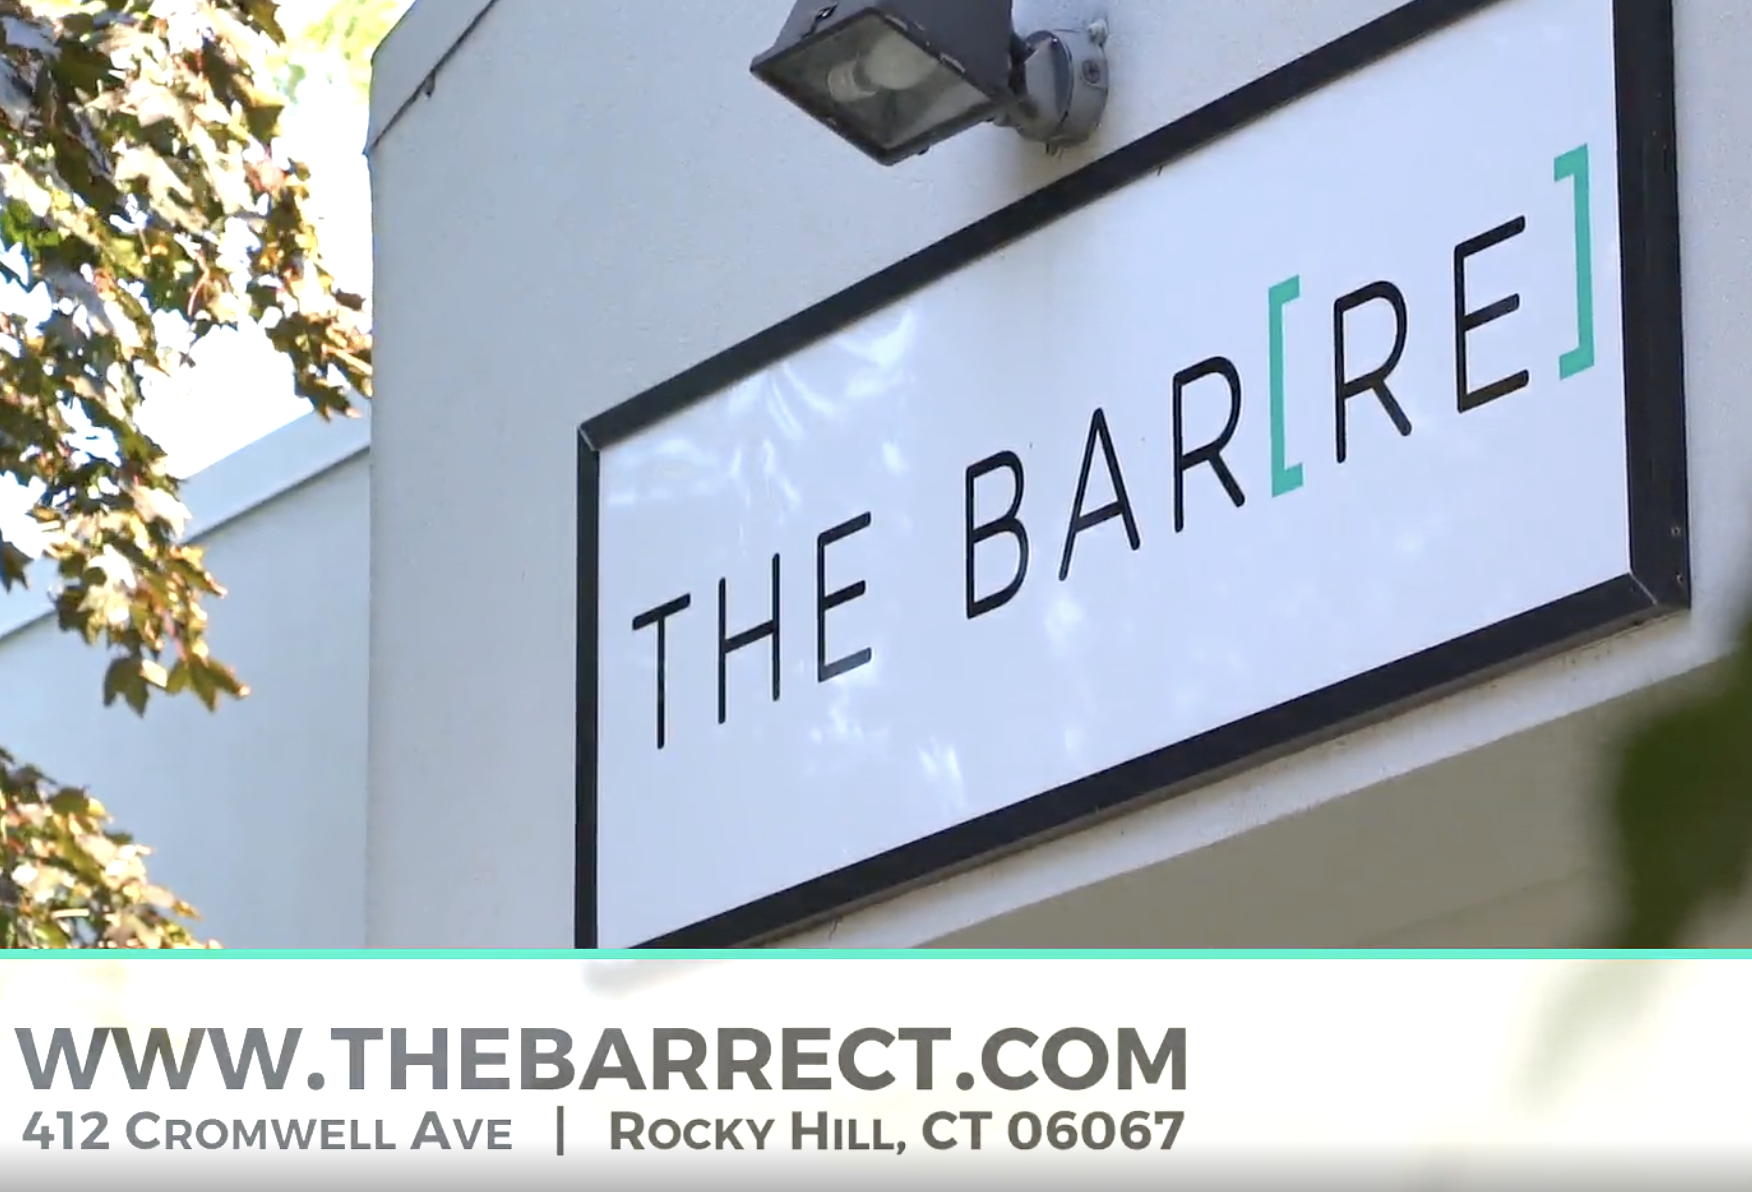 The Barre